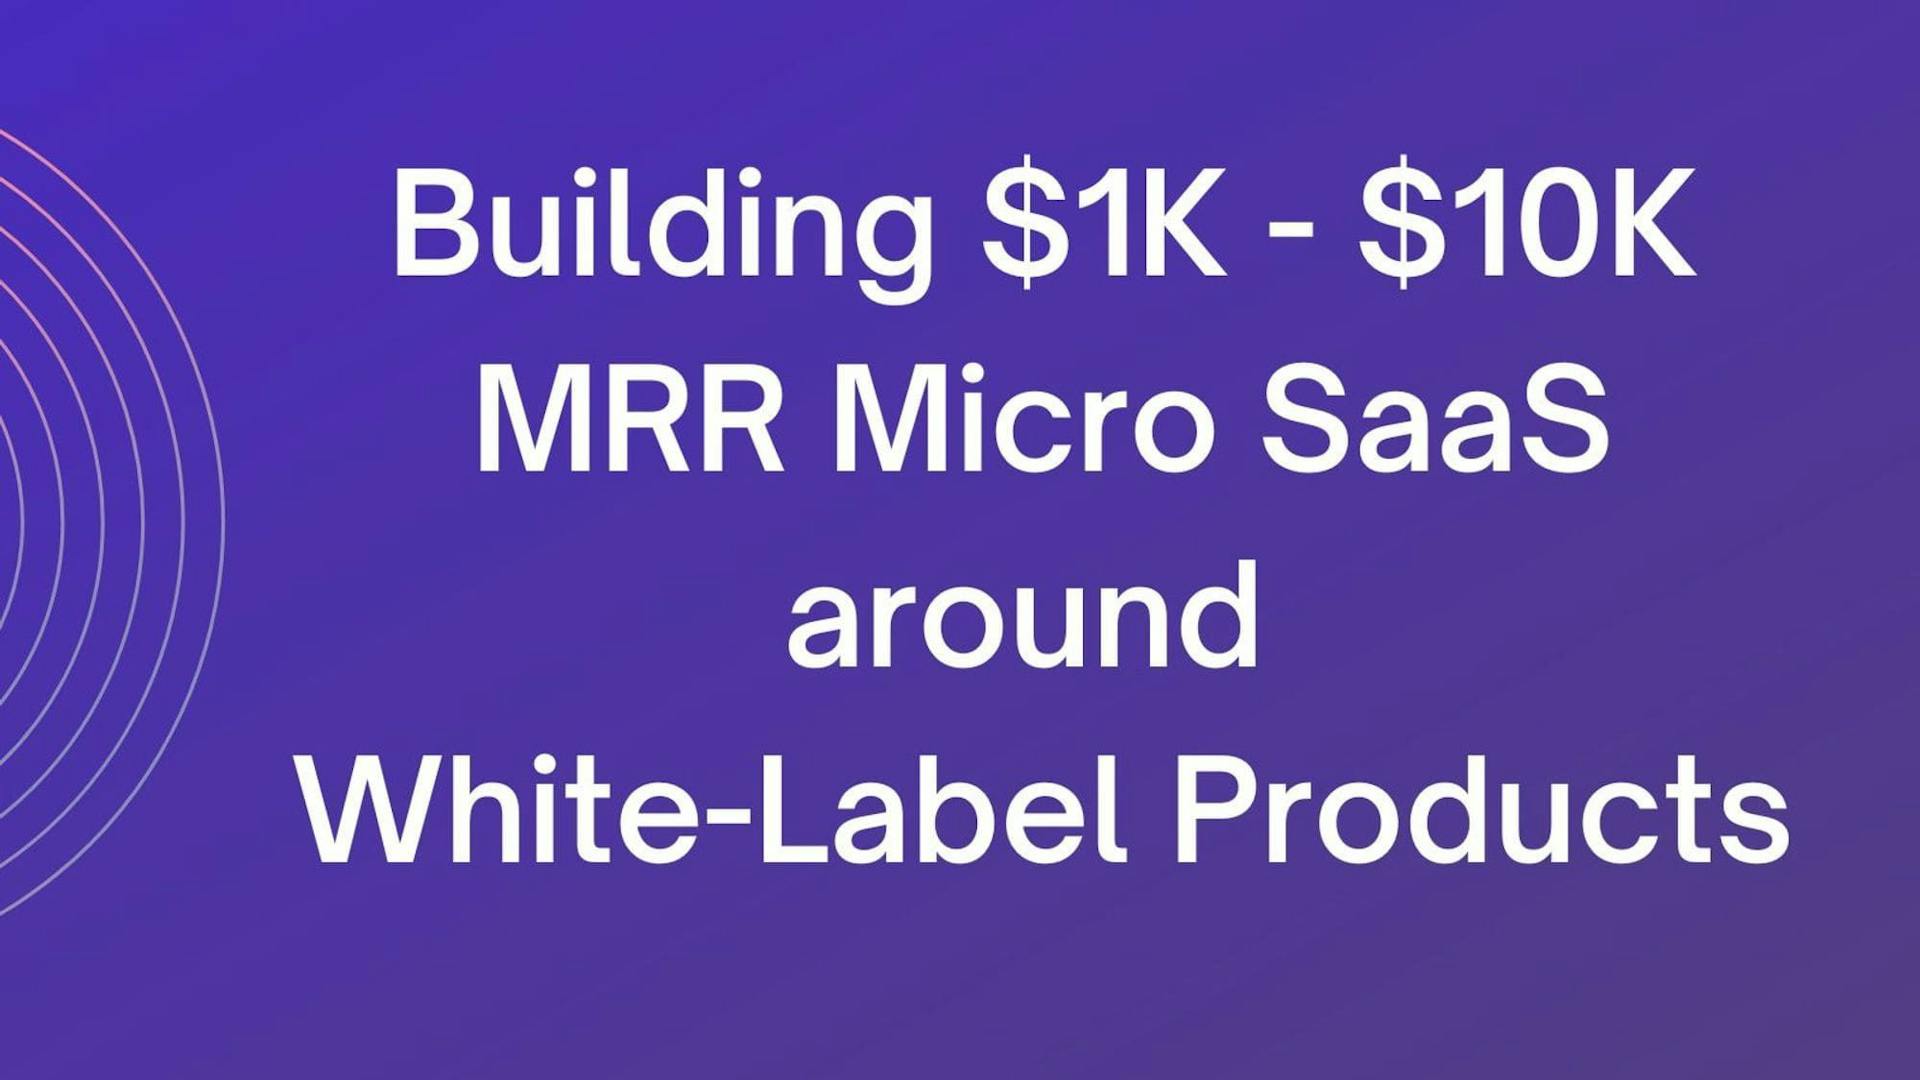 Cover Image for 3 Micro SaaS Ideas around White-Label Products